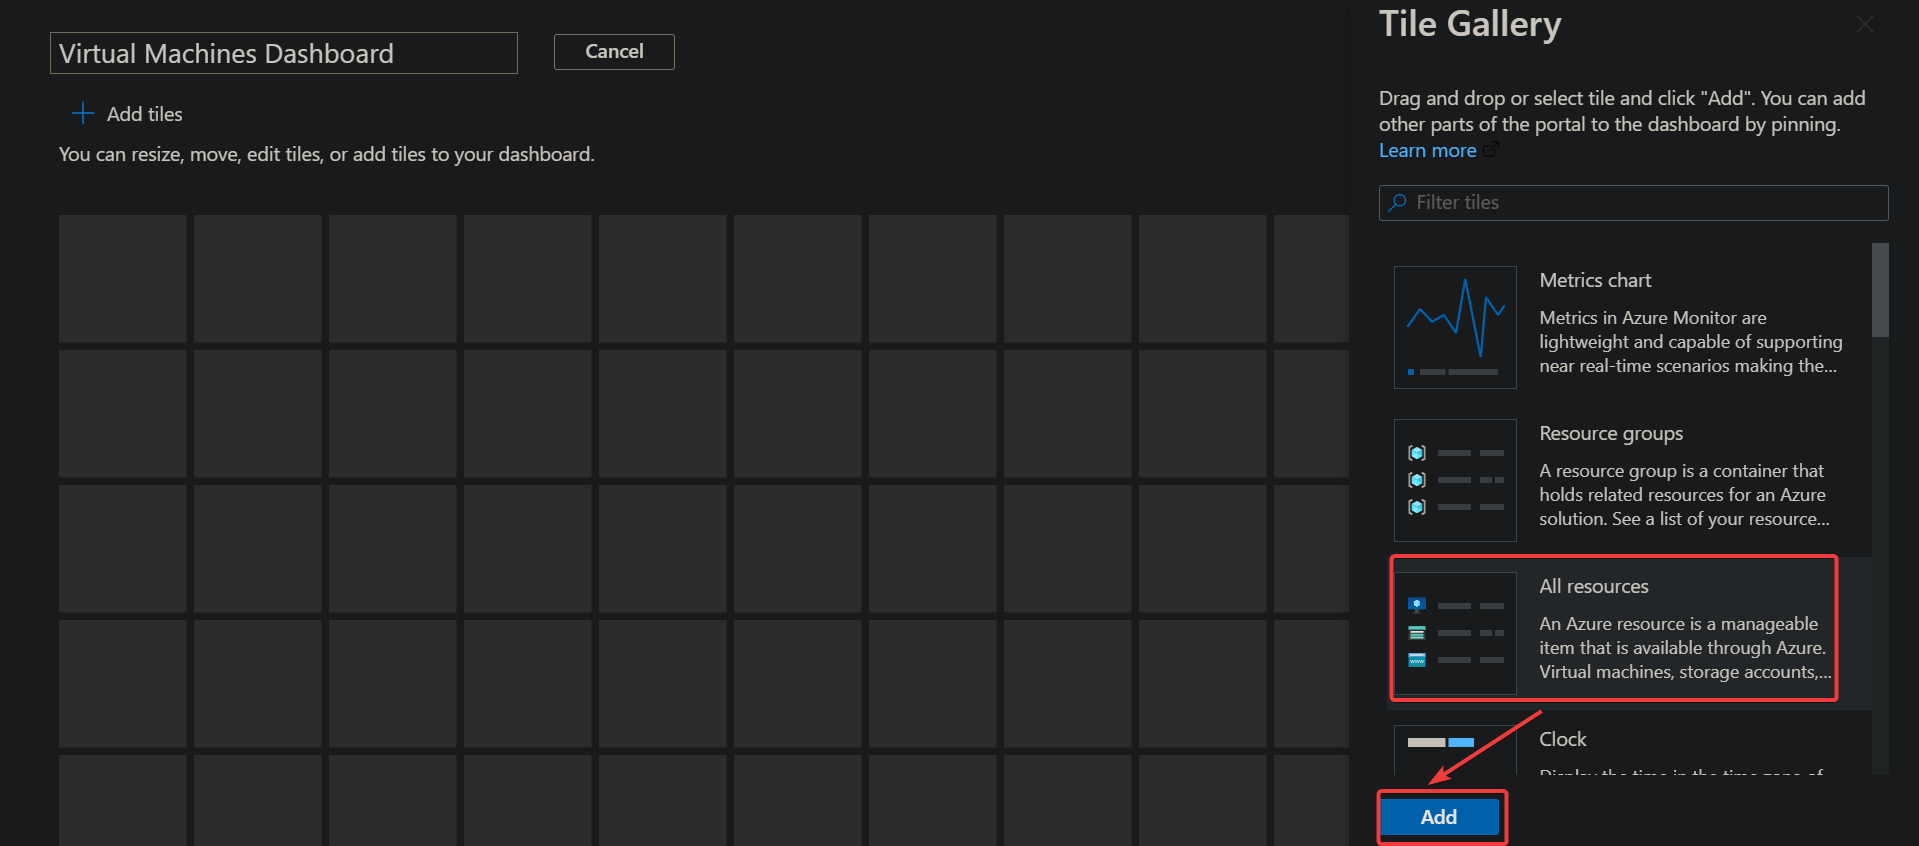 Adding a tile to the custom dashboard